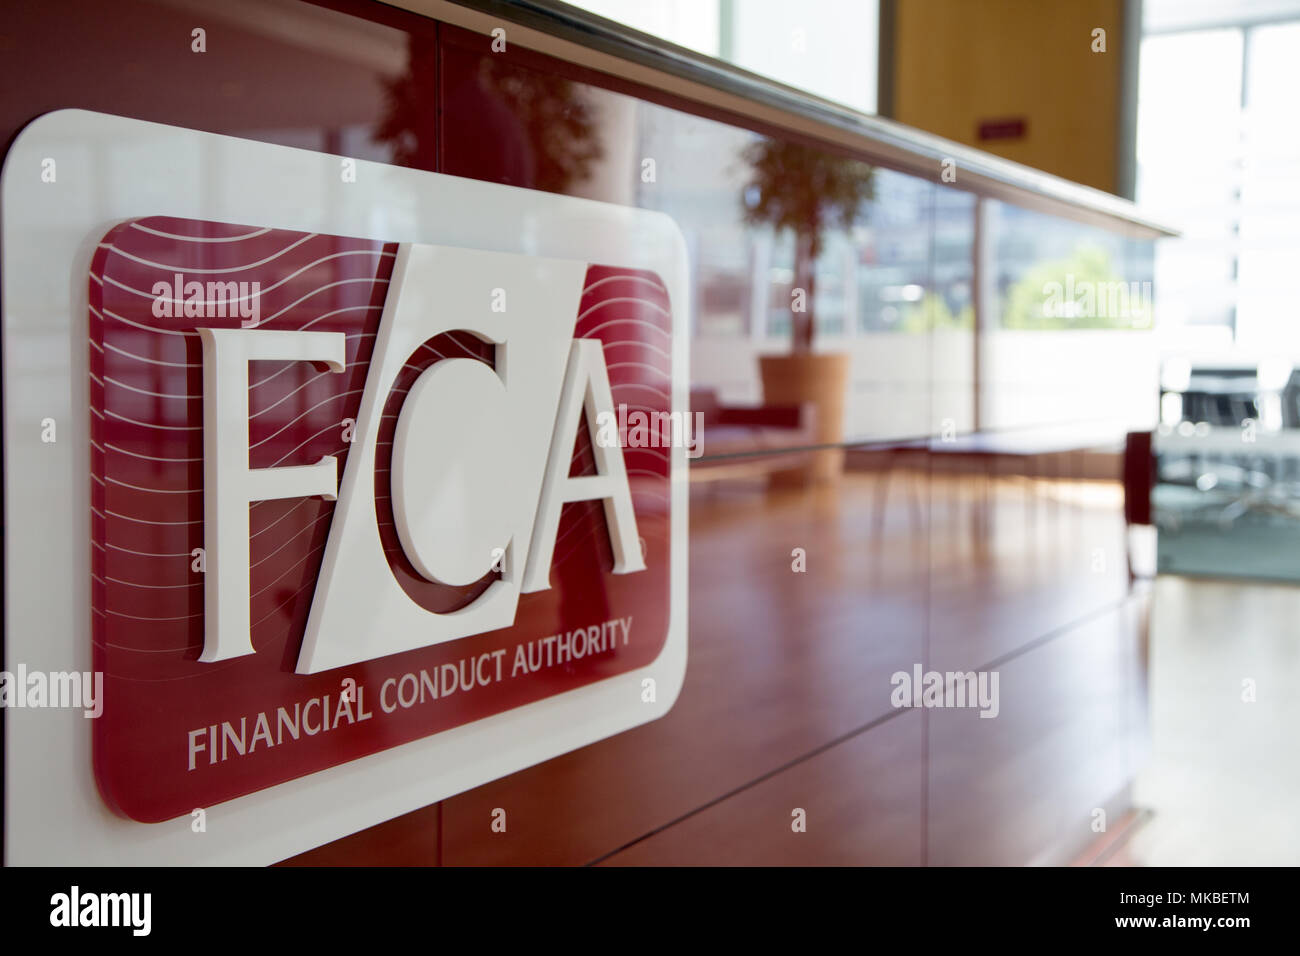 Financial Conduct Authority (FCA) offices, North Colonnade, Docklands, London. Upstairs reception showing corporate logo Stock Photo